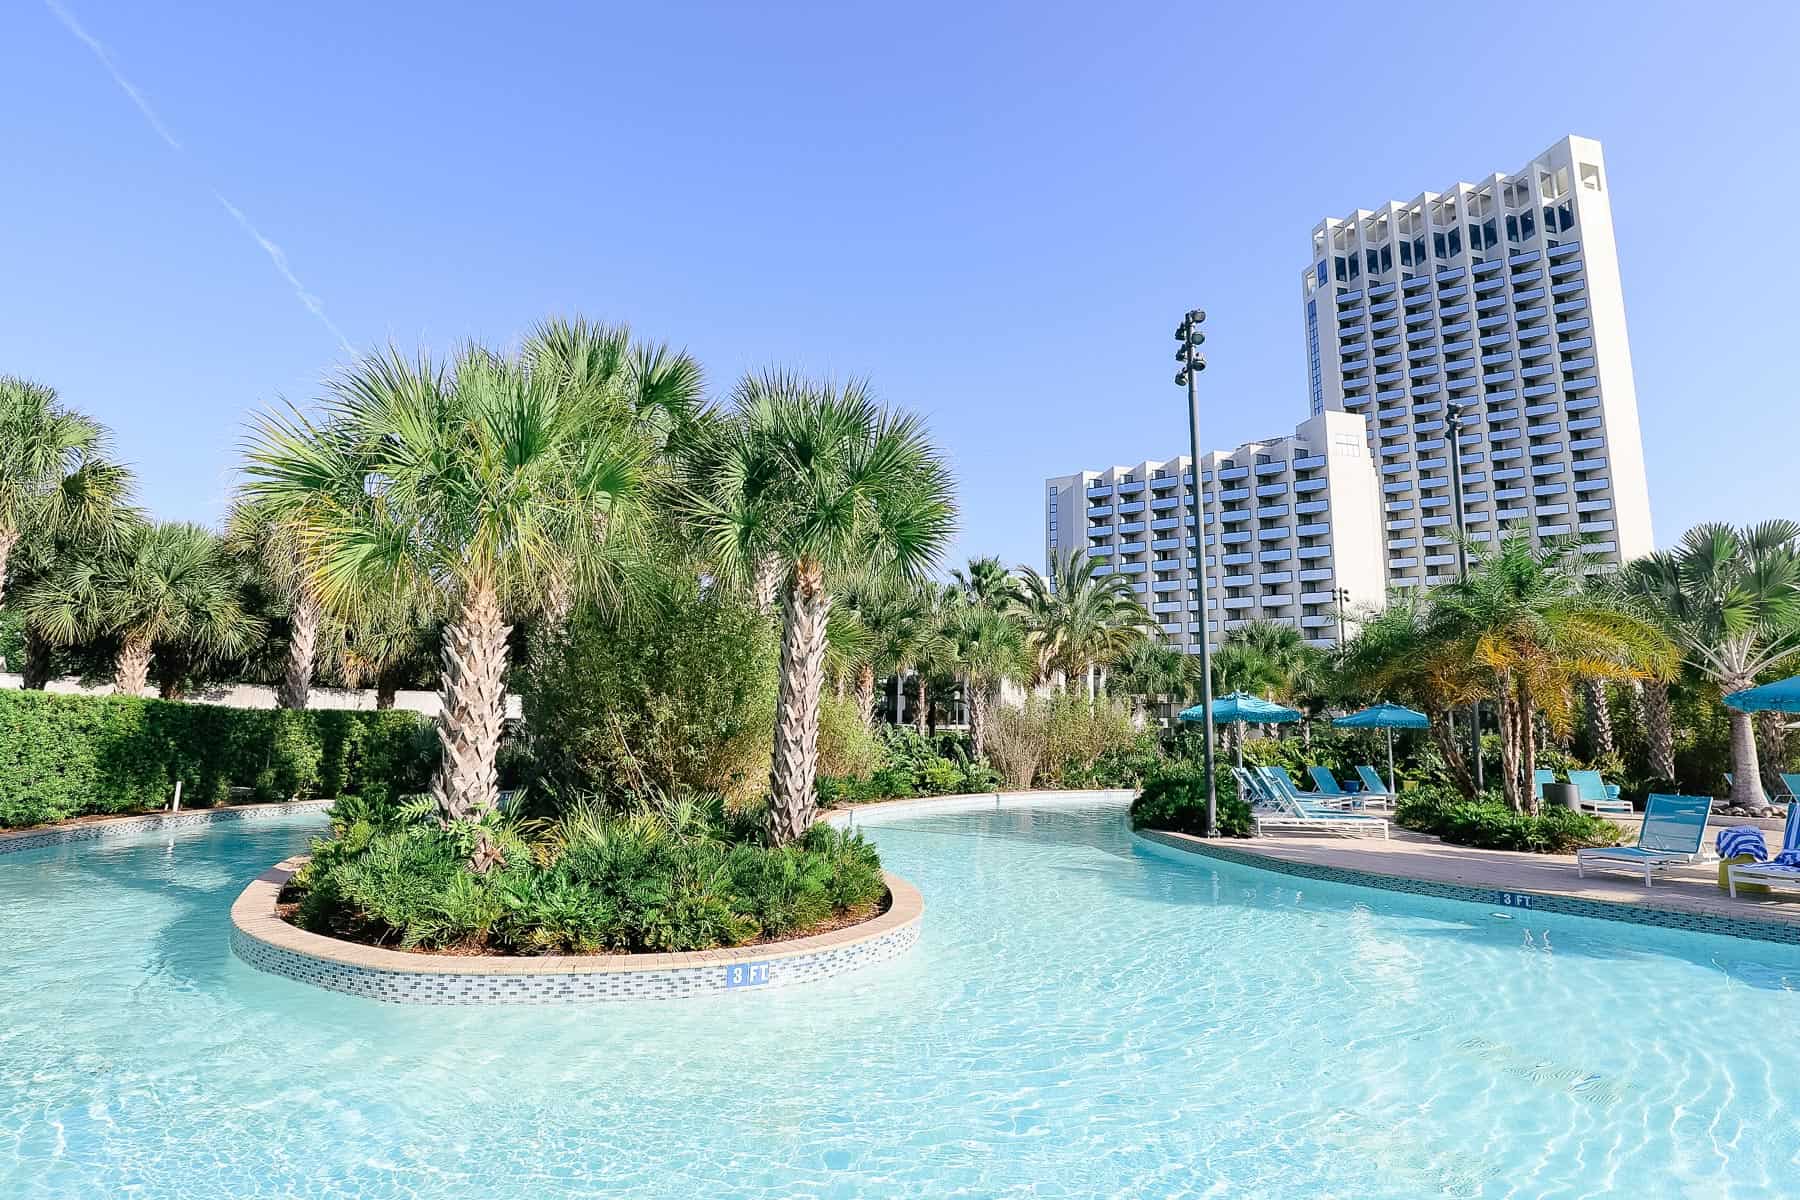 This off-site hotel near Disney World offers a lazy river. 